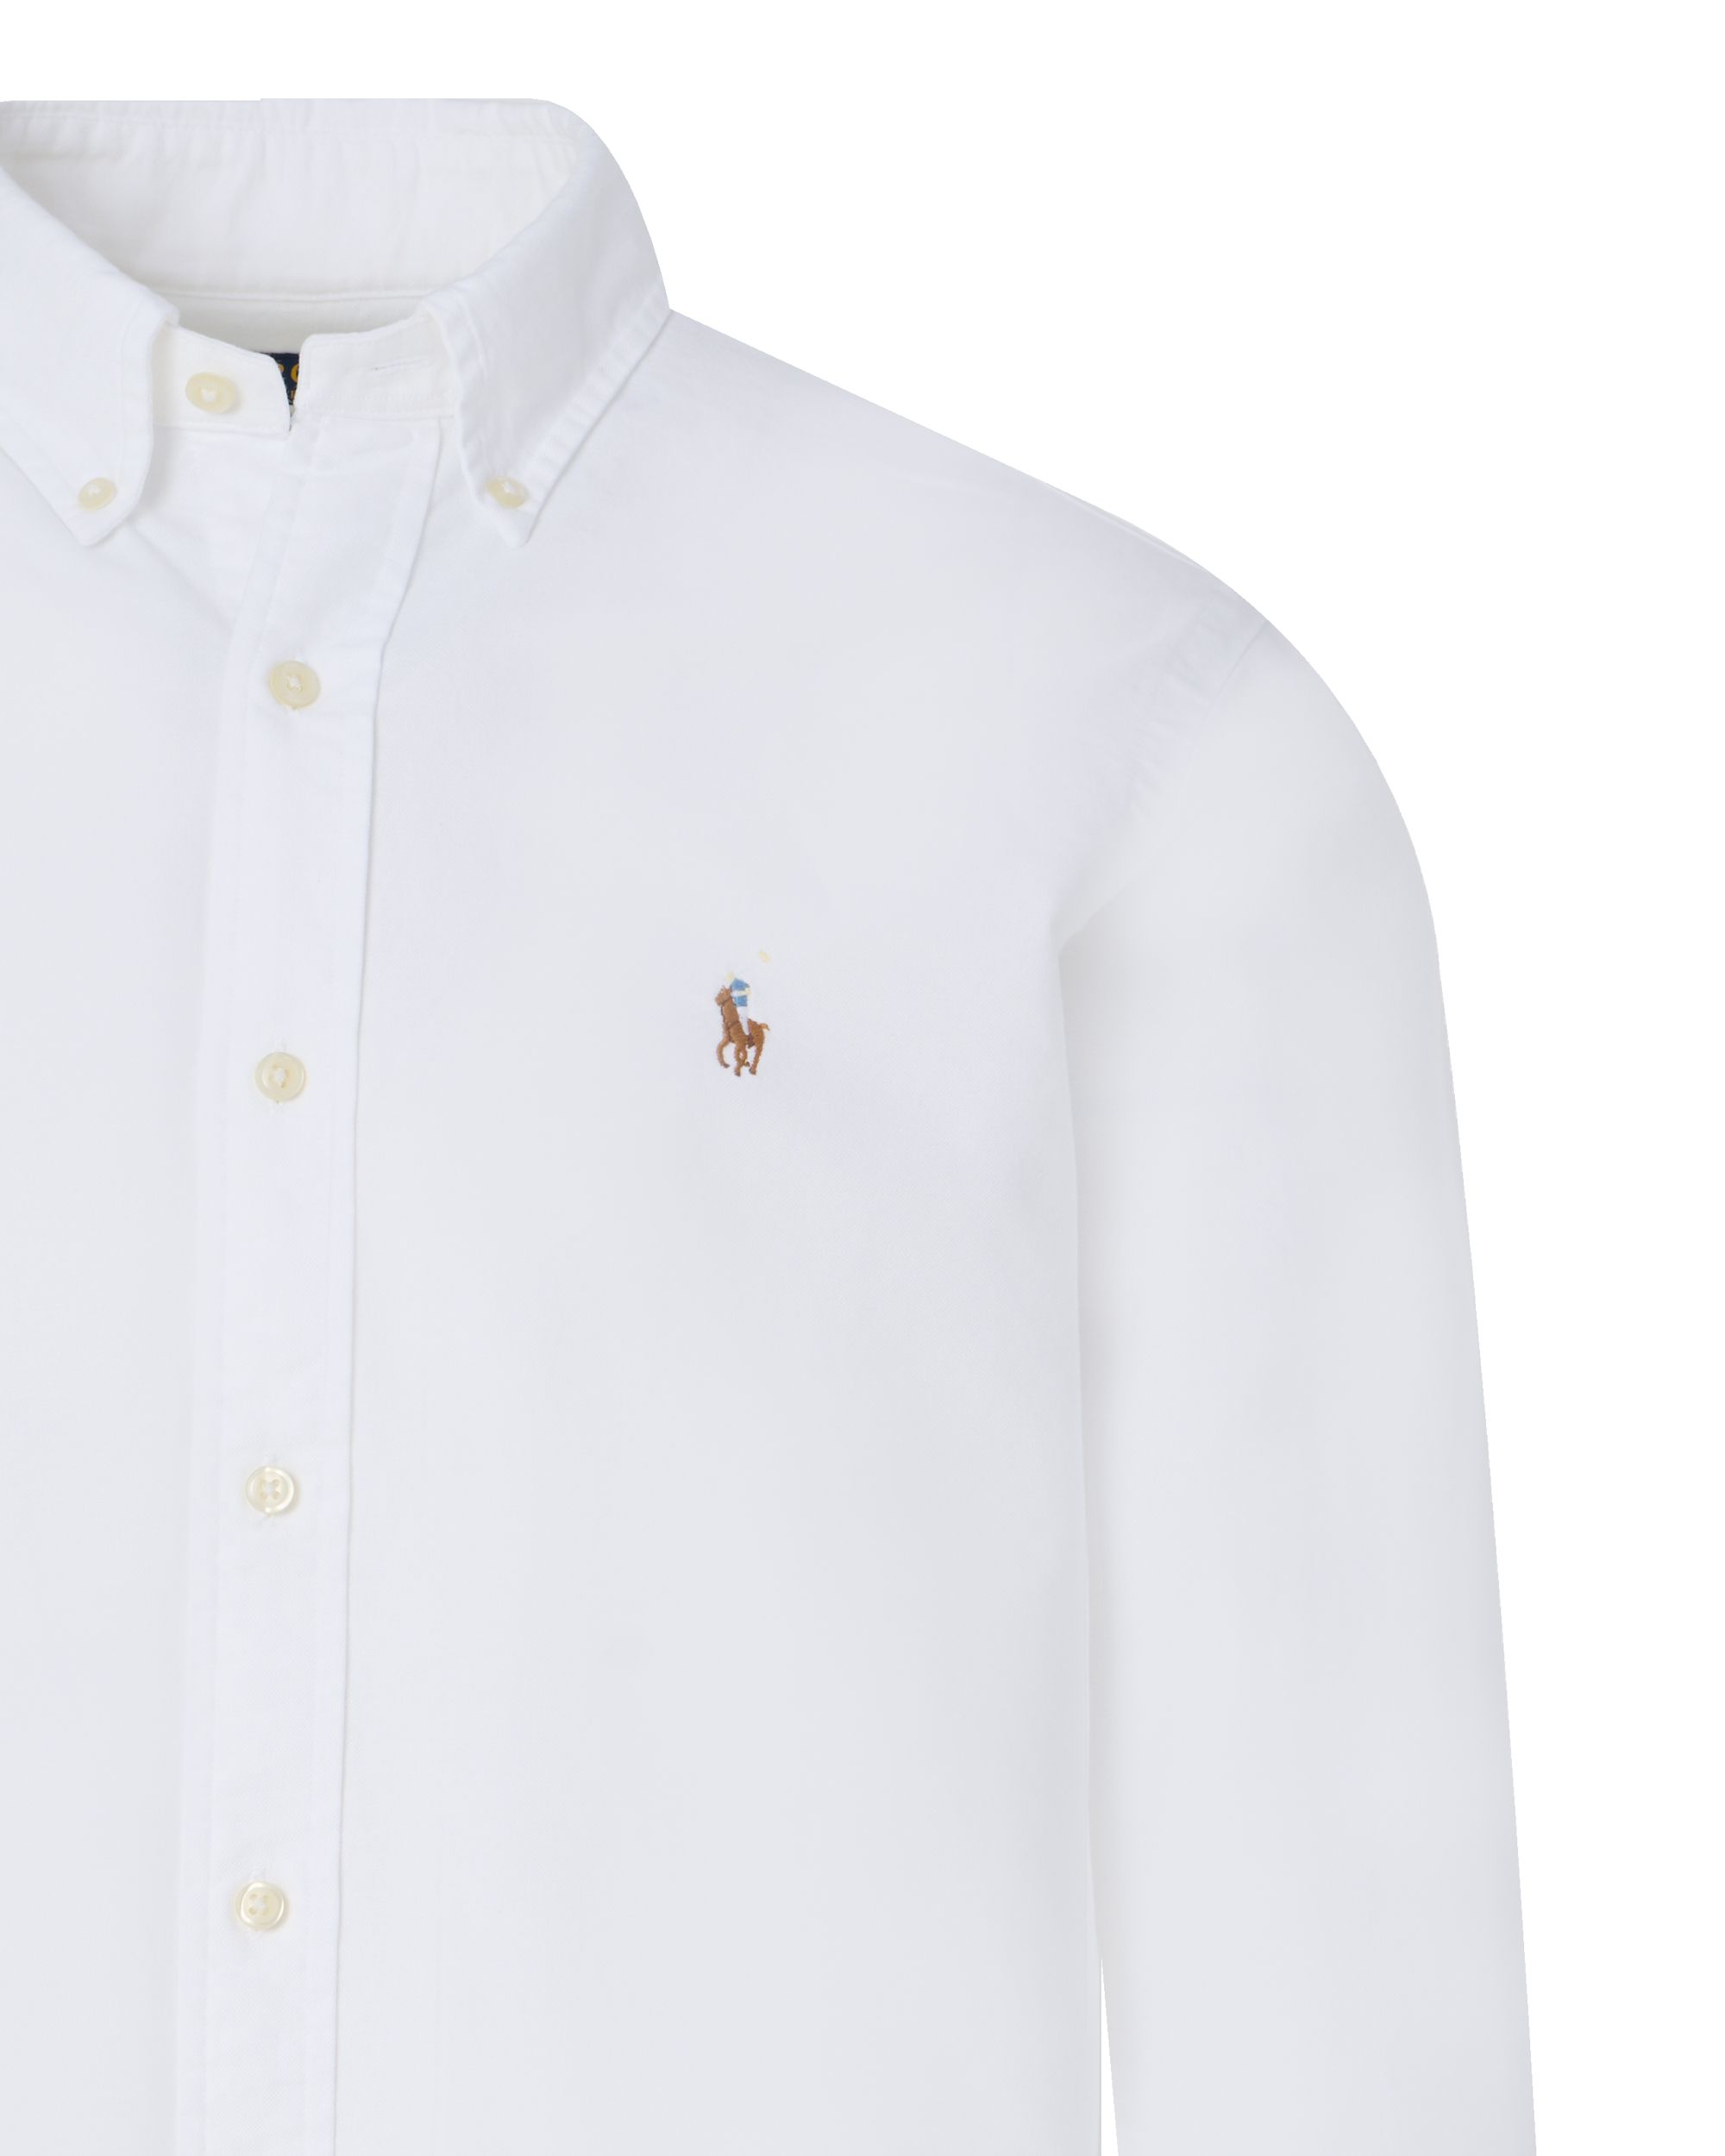 Polo Ralph Lauren Casual Overhemd LM Wit 095324-001-L